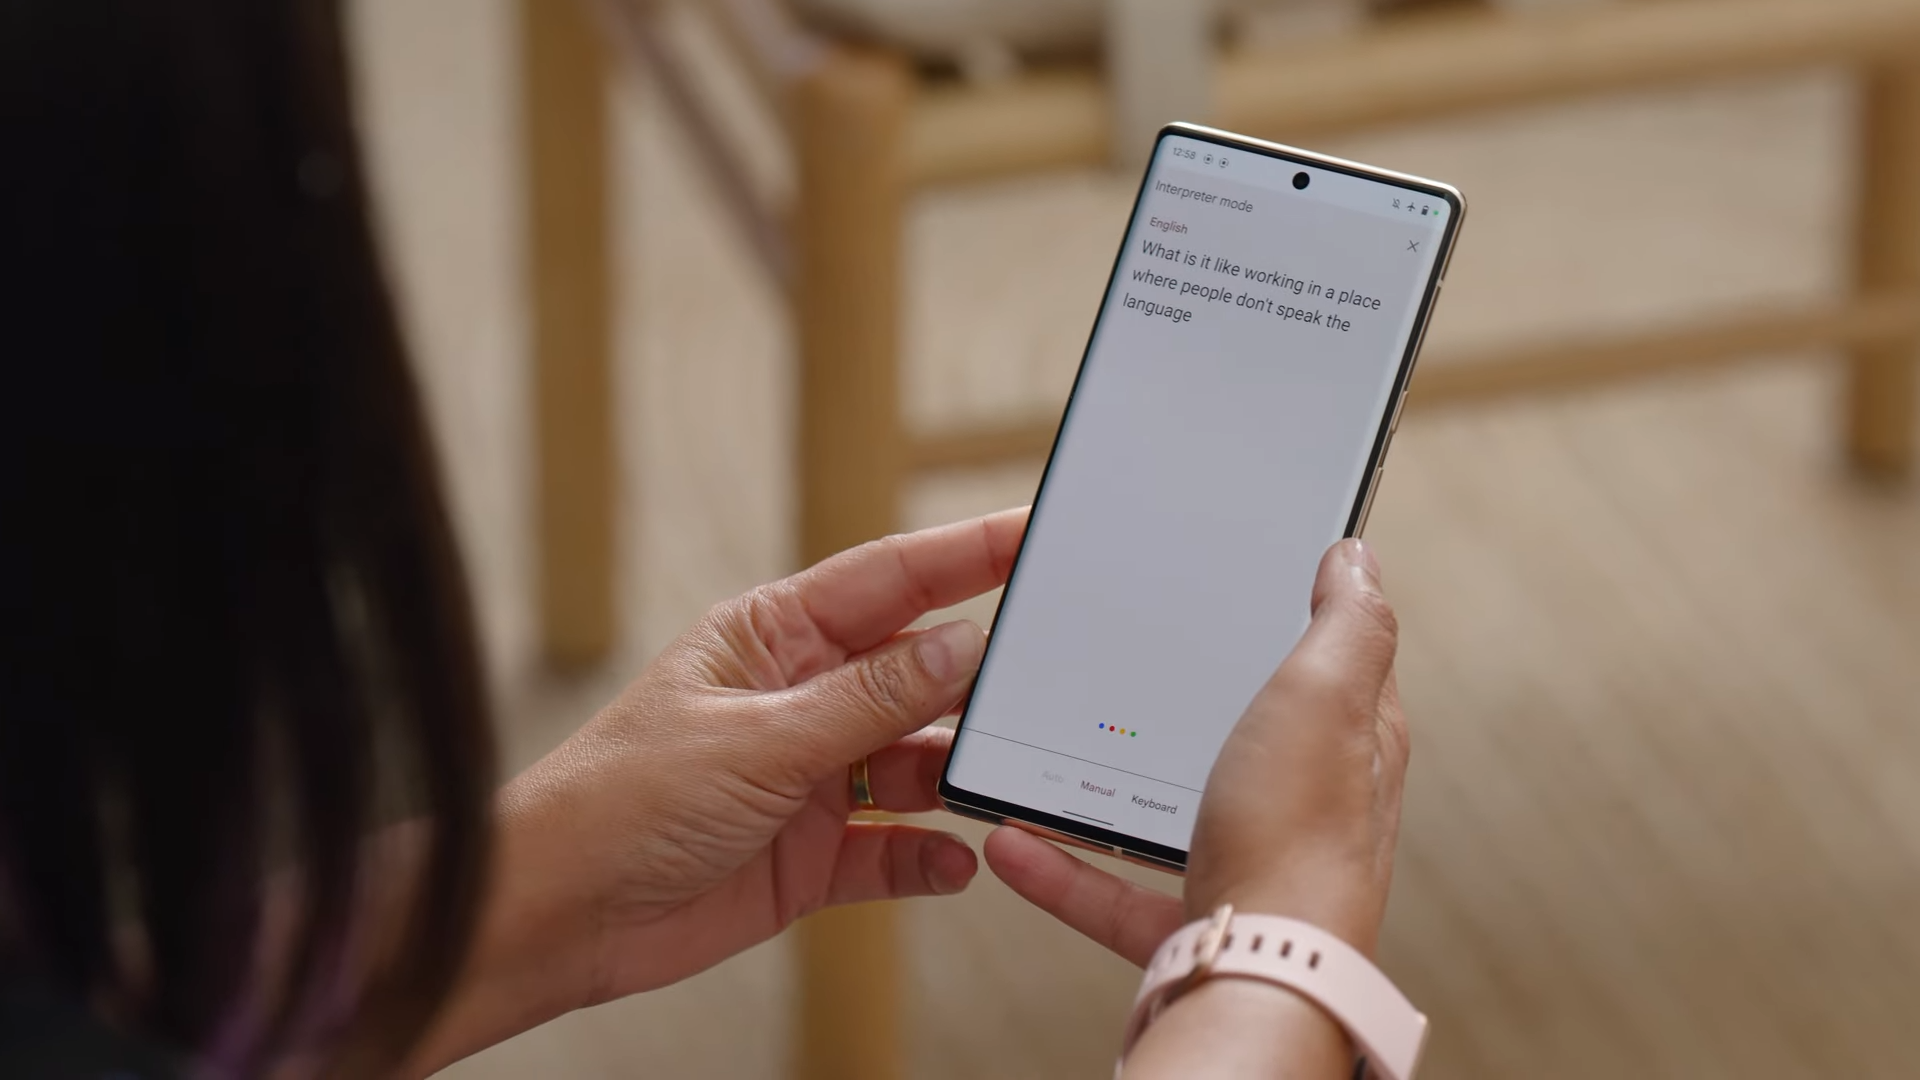 A person wearing a watch with a pink band holds a Google Pixel phone and looks at a translation. 